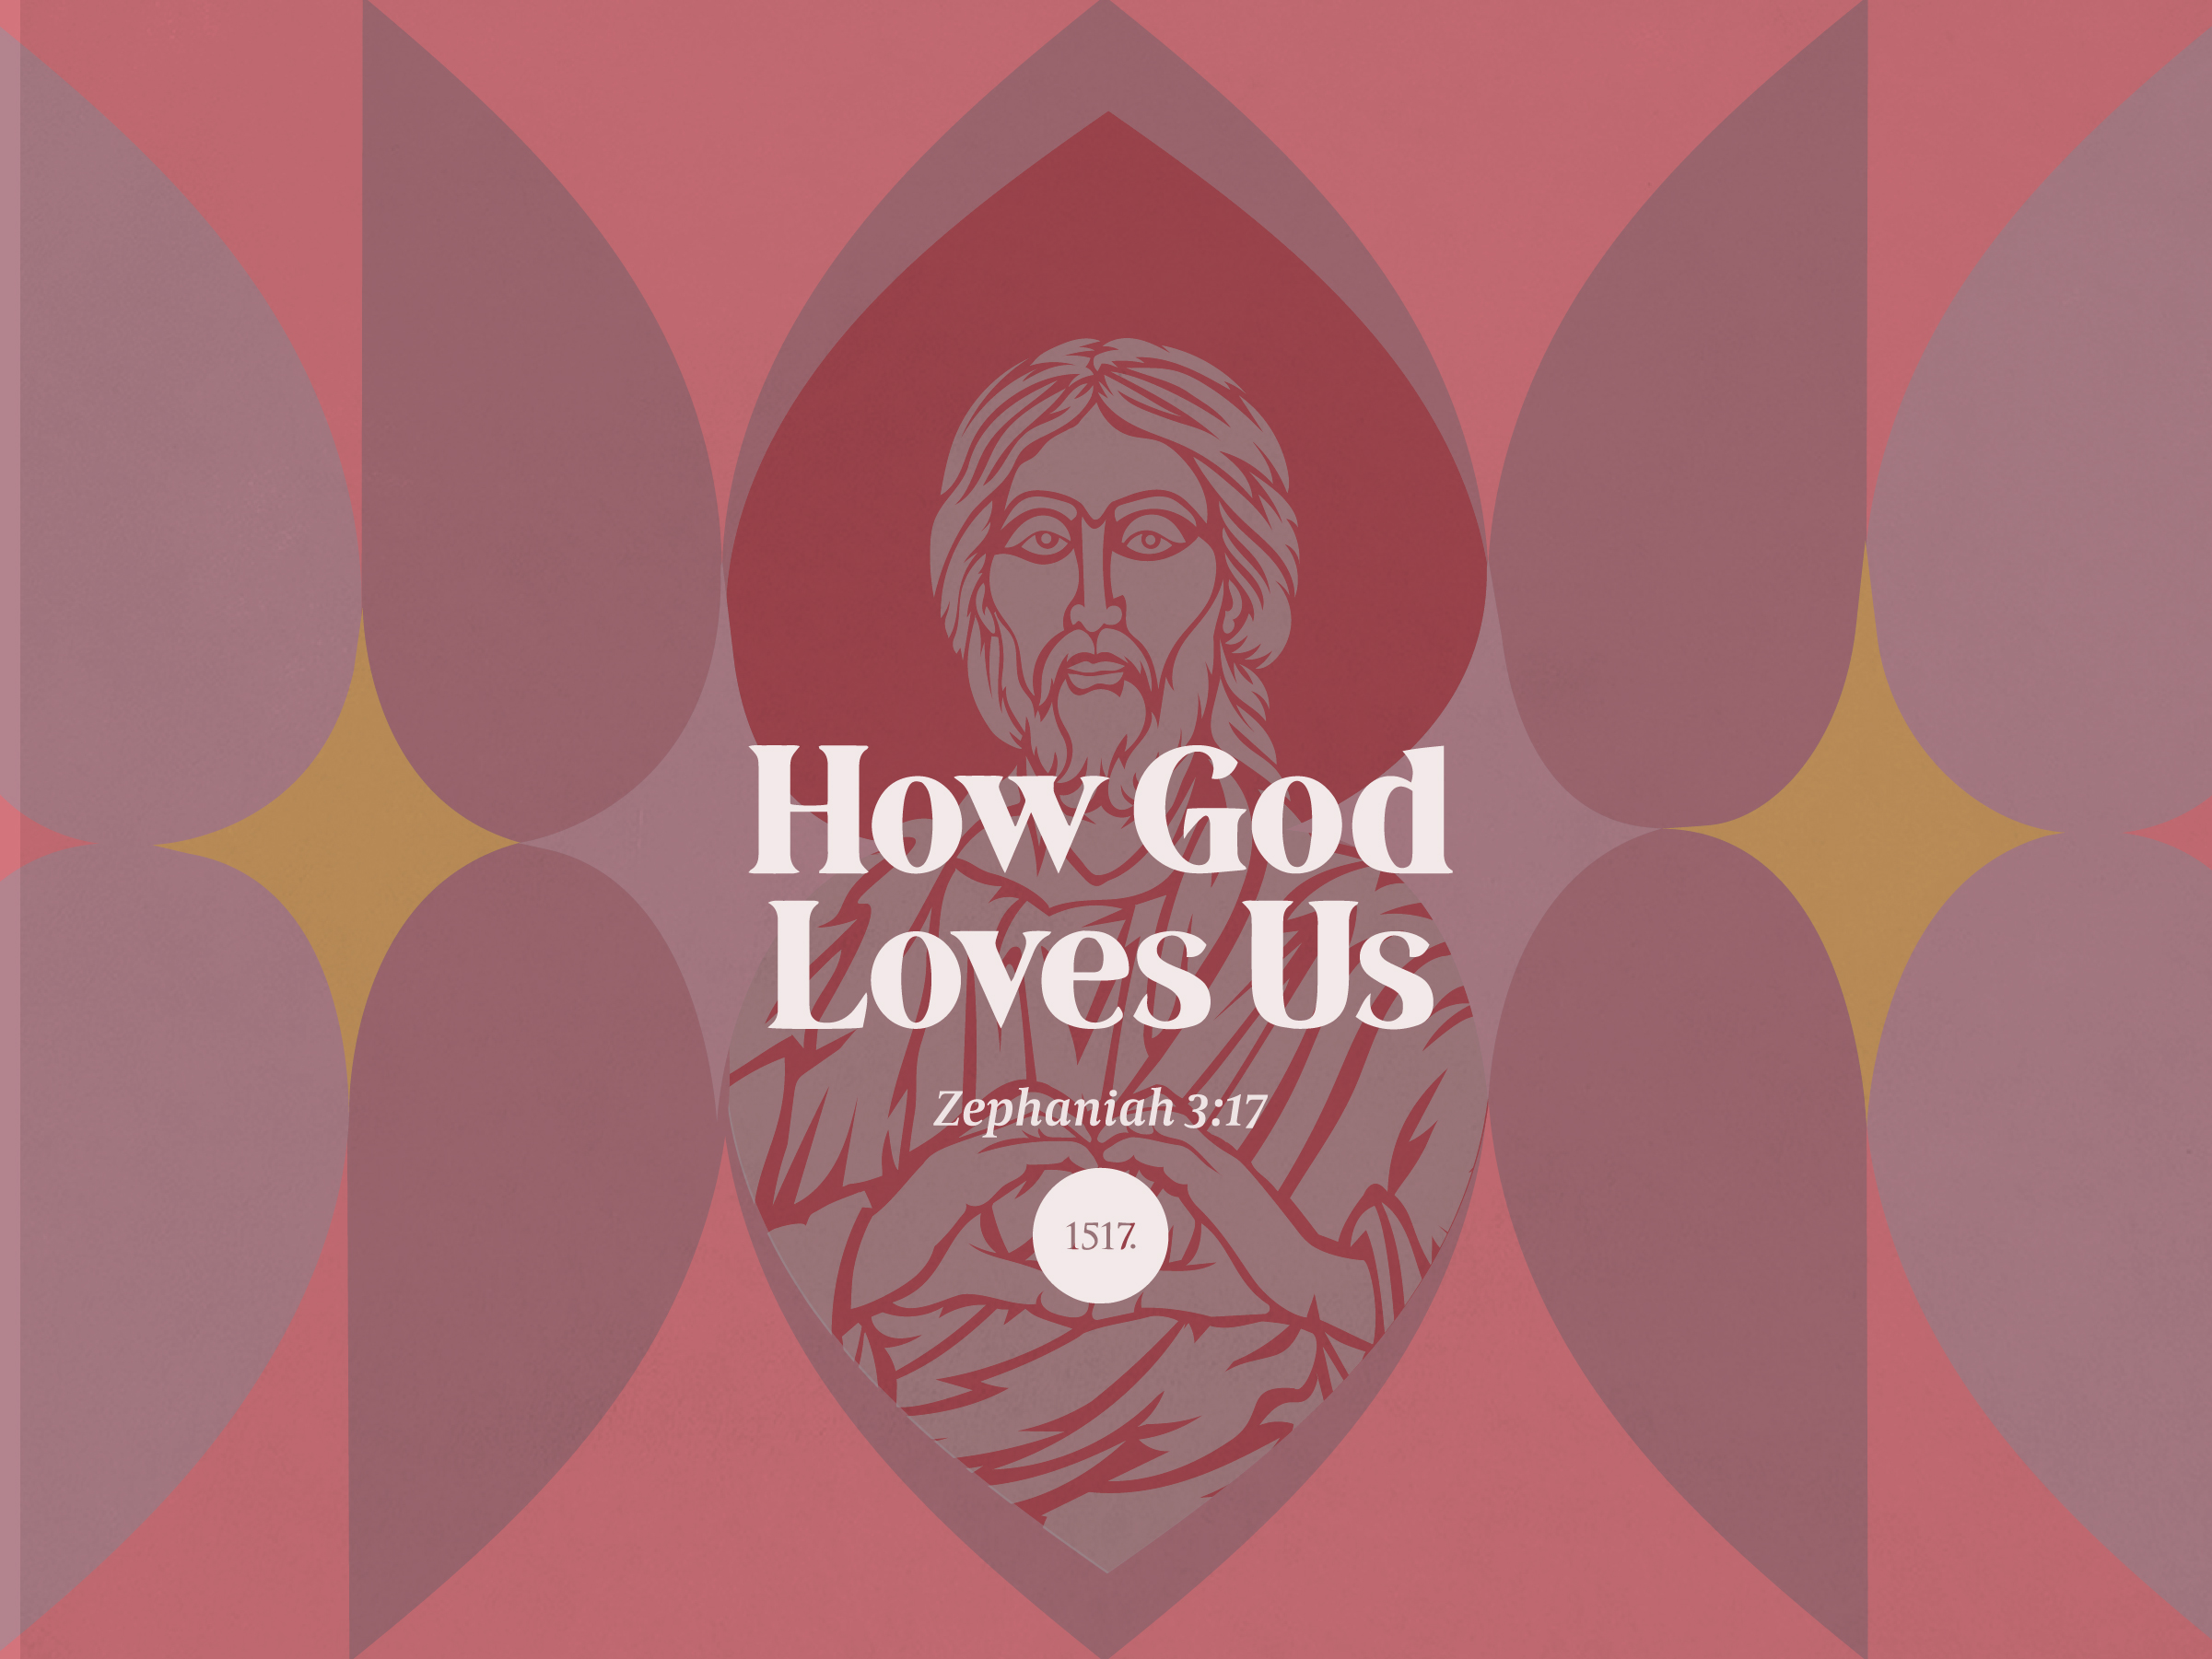 How God Loves Us: The Sound of Salvation, Zephaniah 3:17